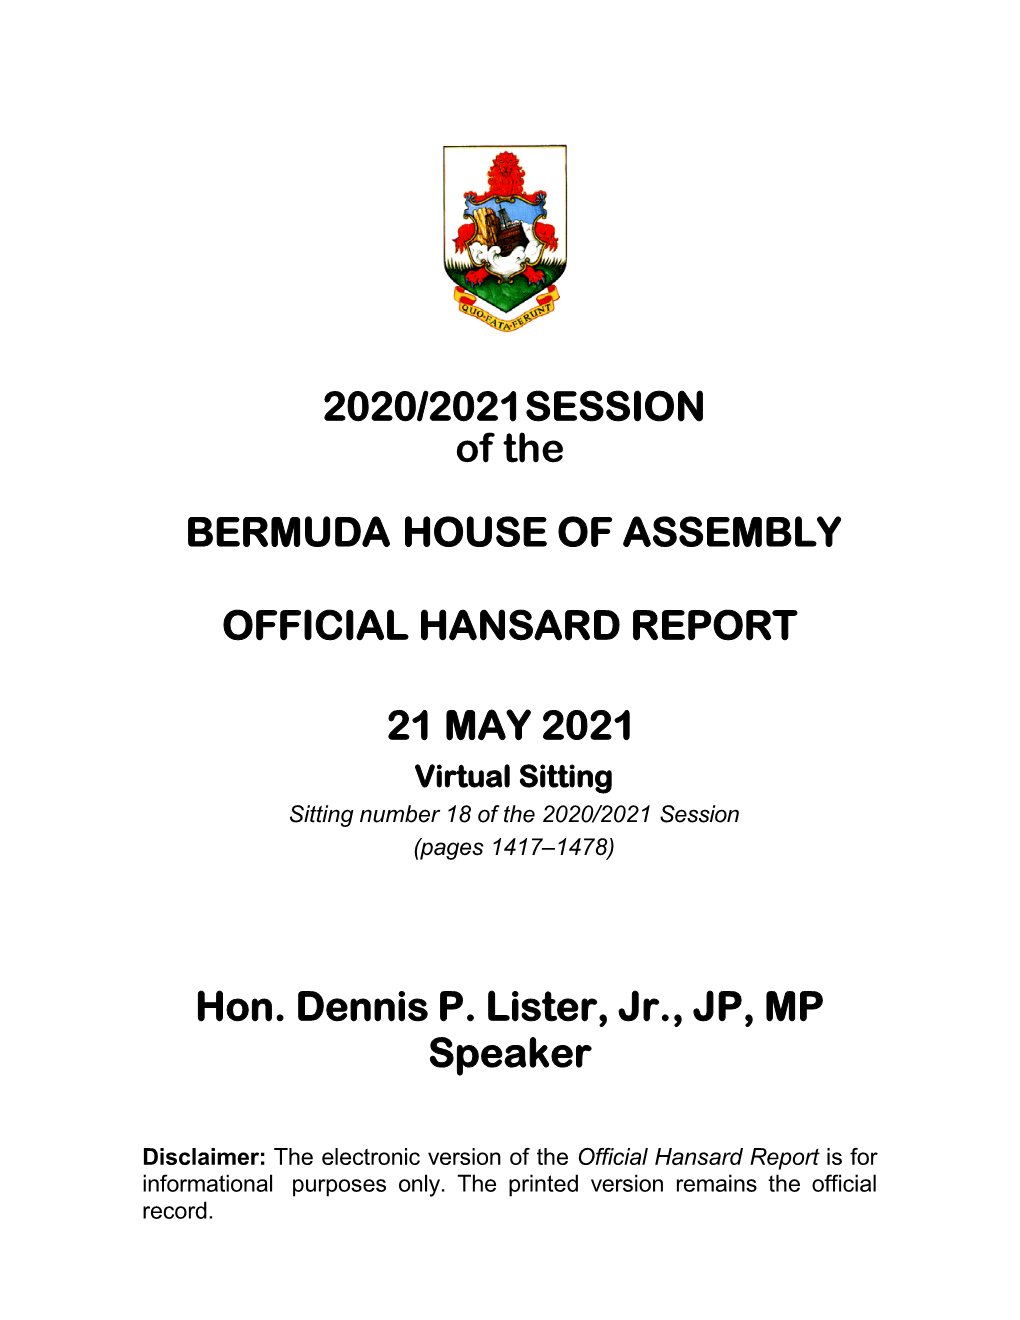 2020/2021 SESSION of the BERMUDA